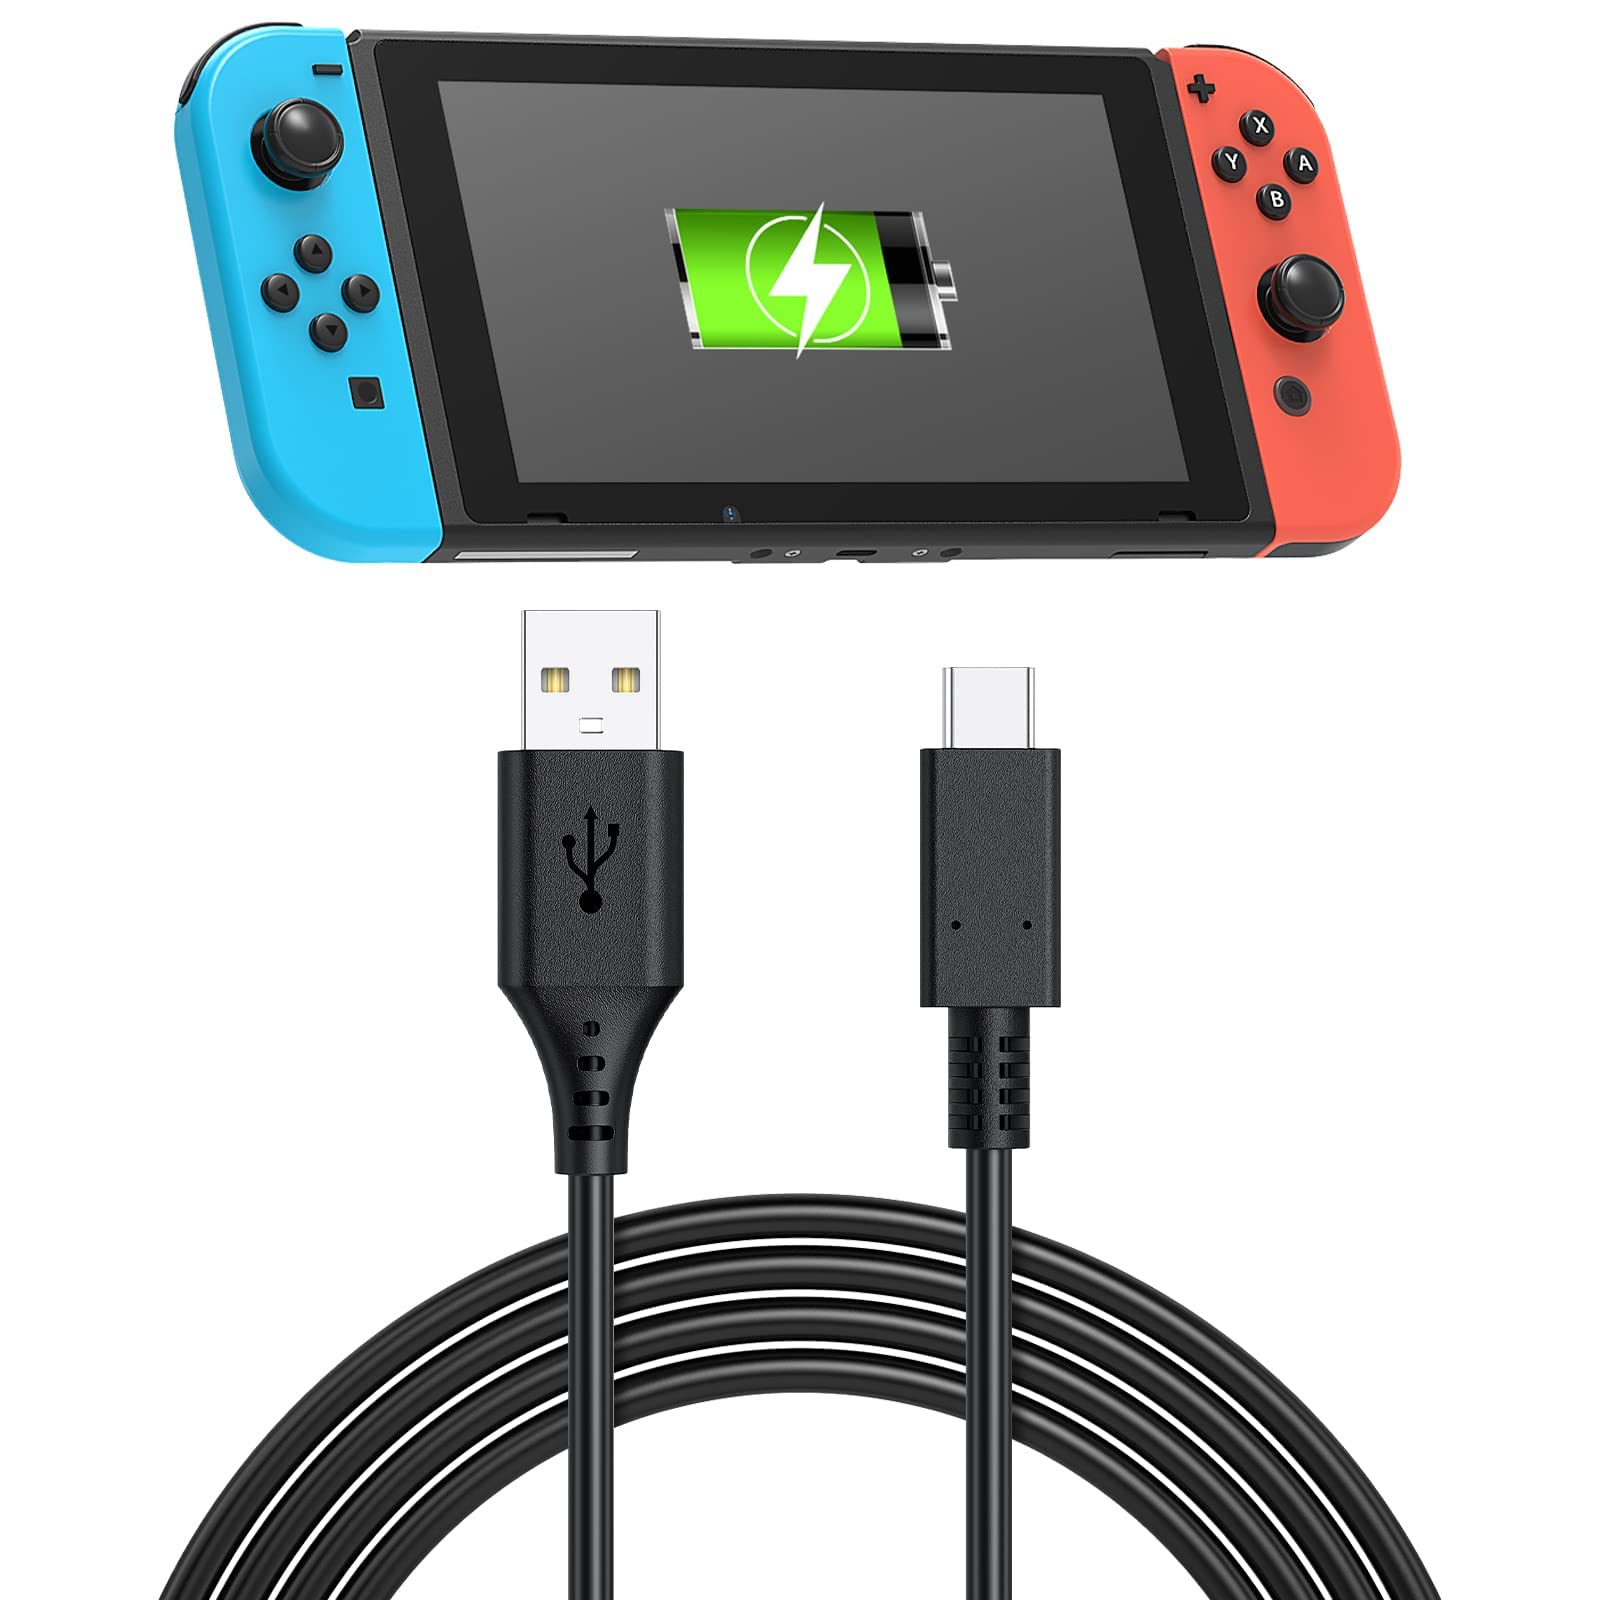 An image of a Nintendo Switch connected to a charger